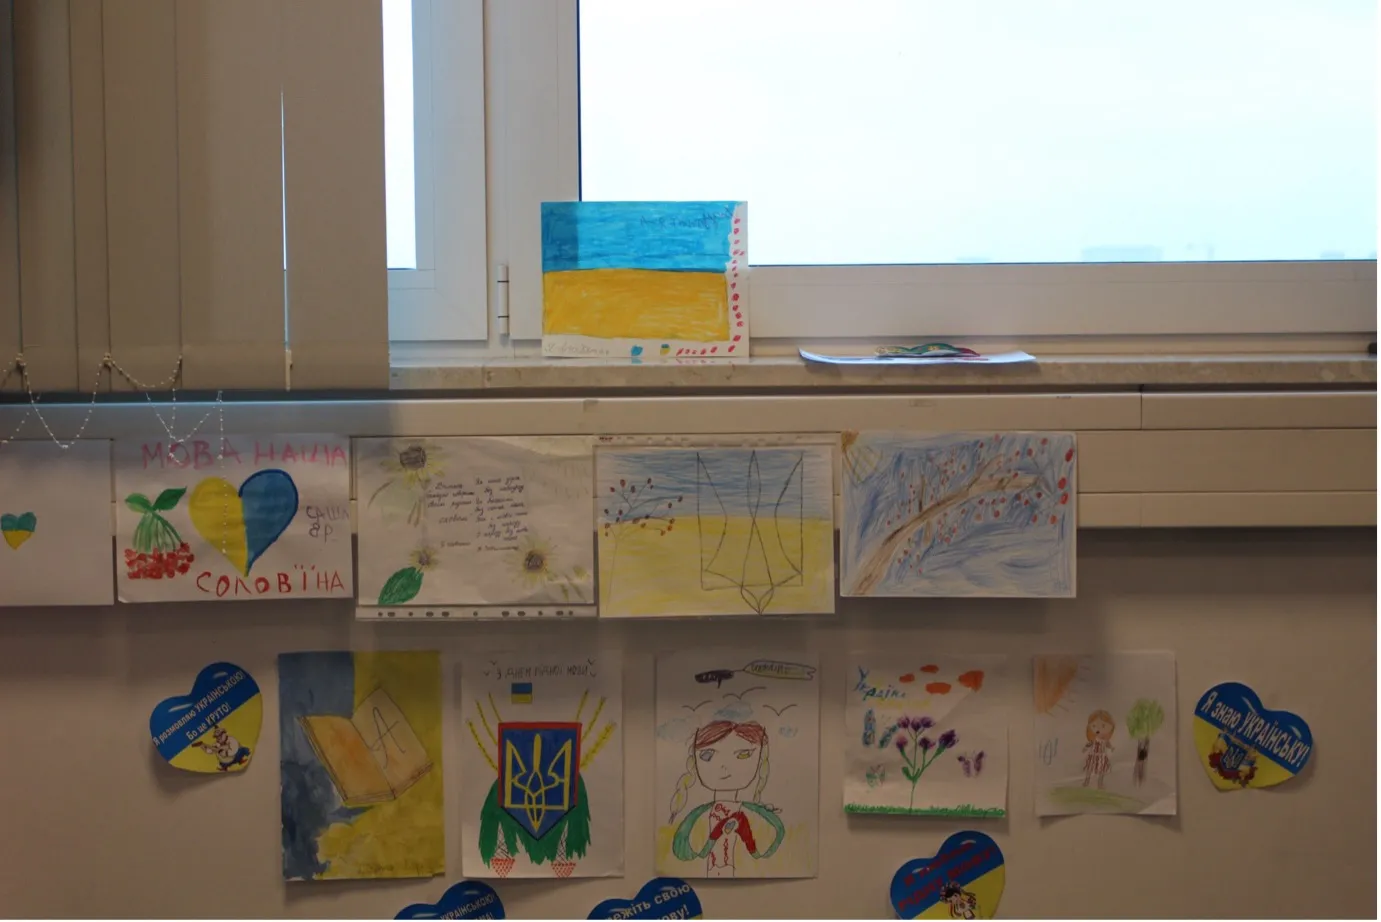 A group of children’s drawings affixed to a wall underneath a window.